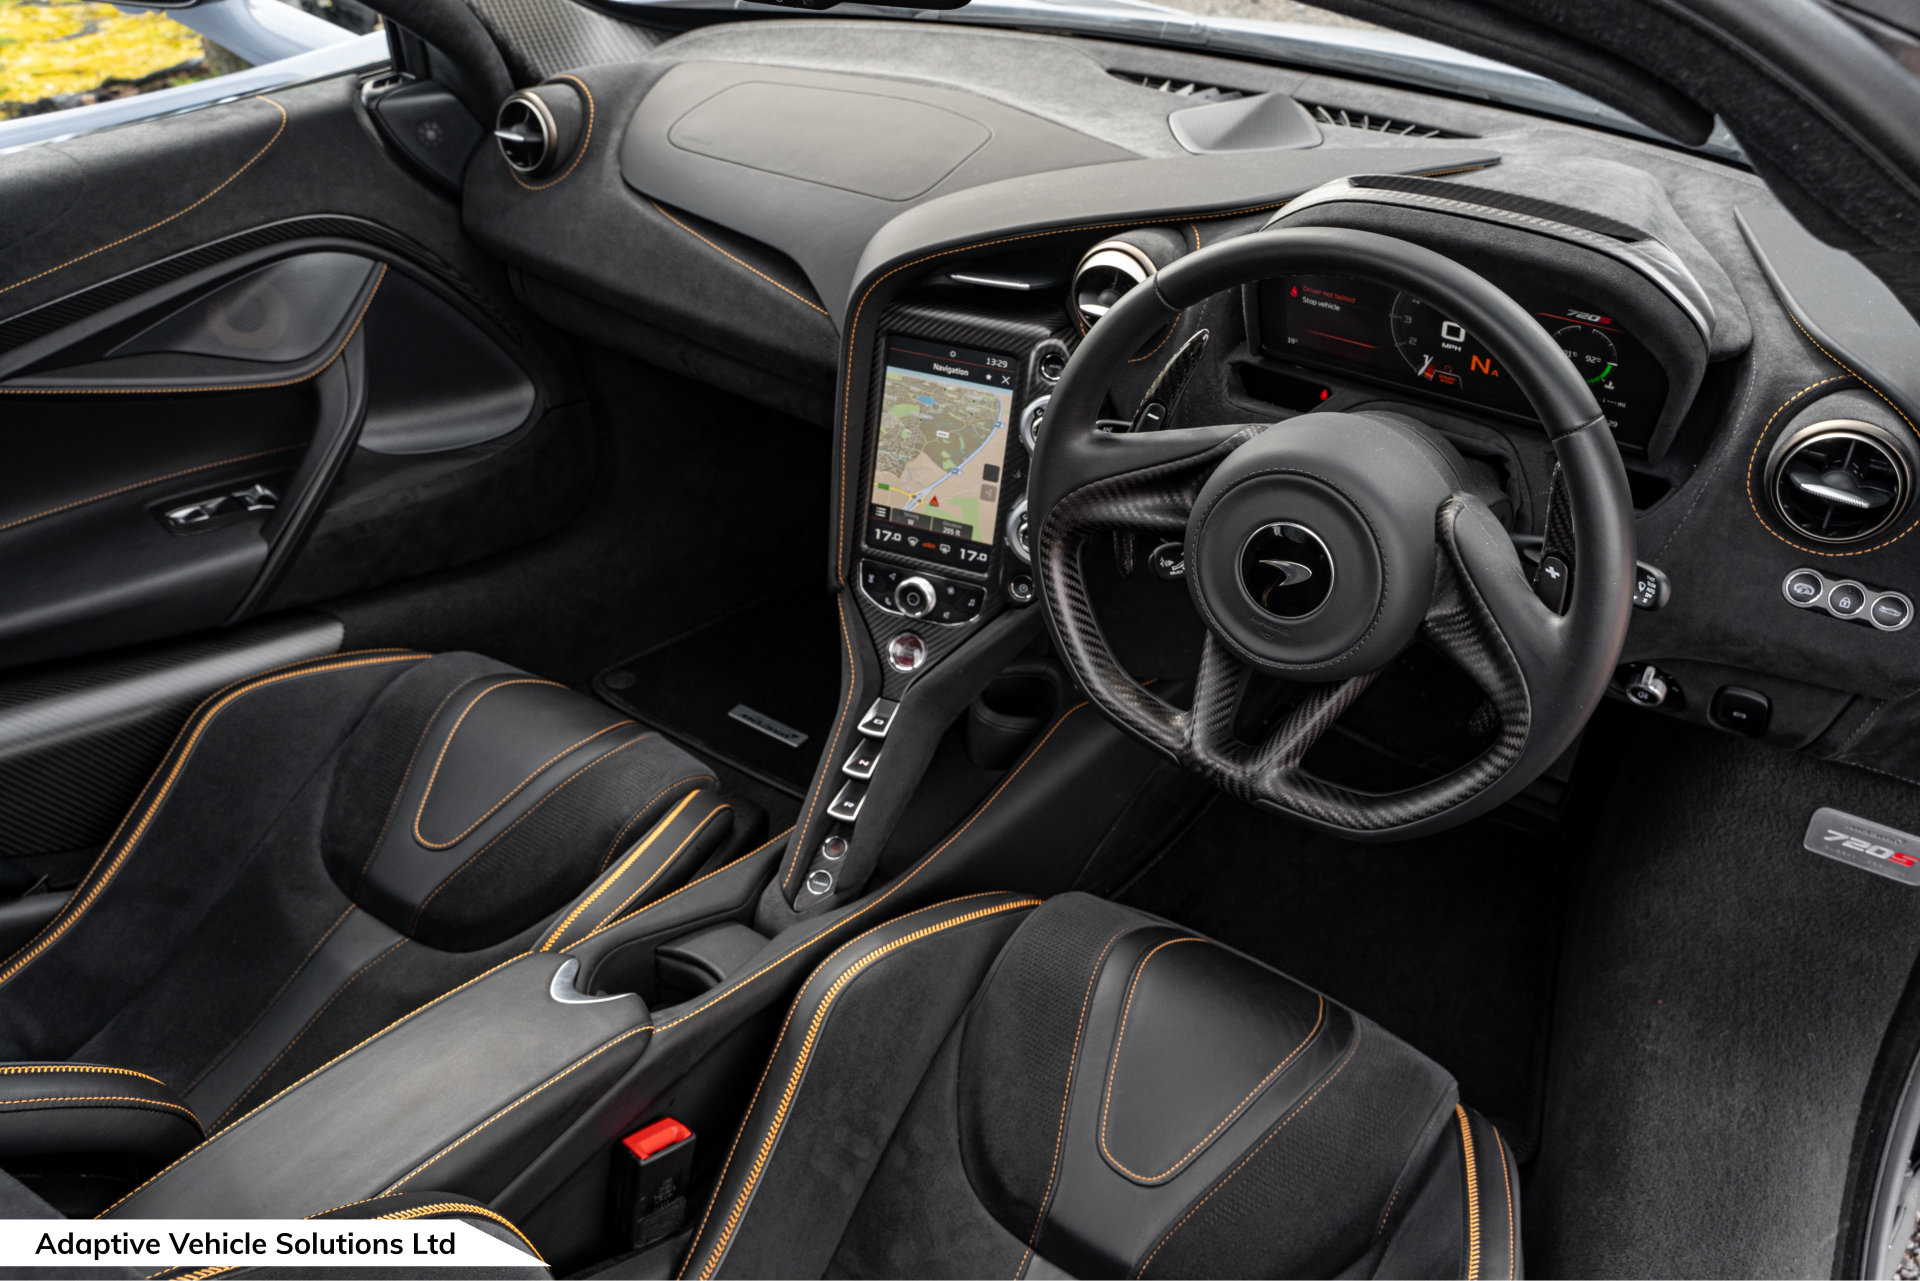 2021 McLaren 720s Performance Coupe driver side interior